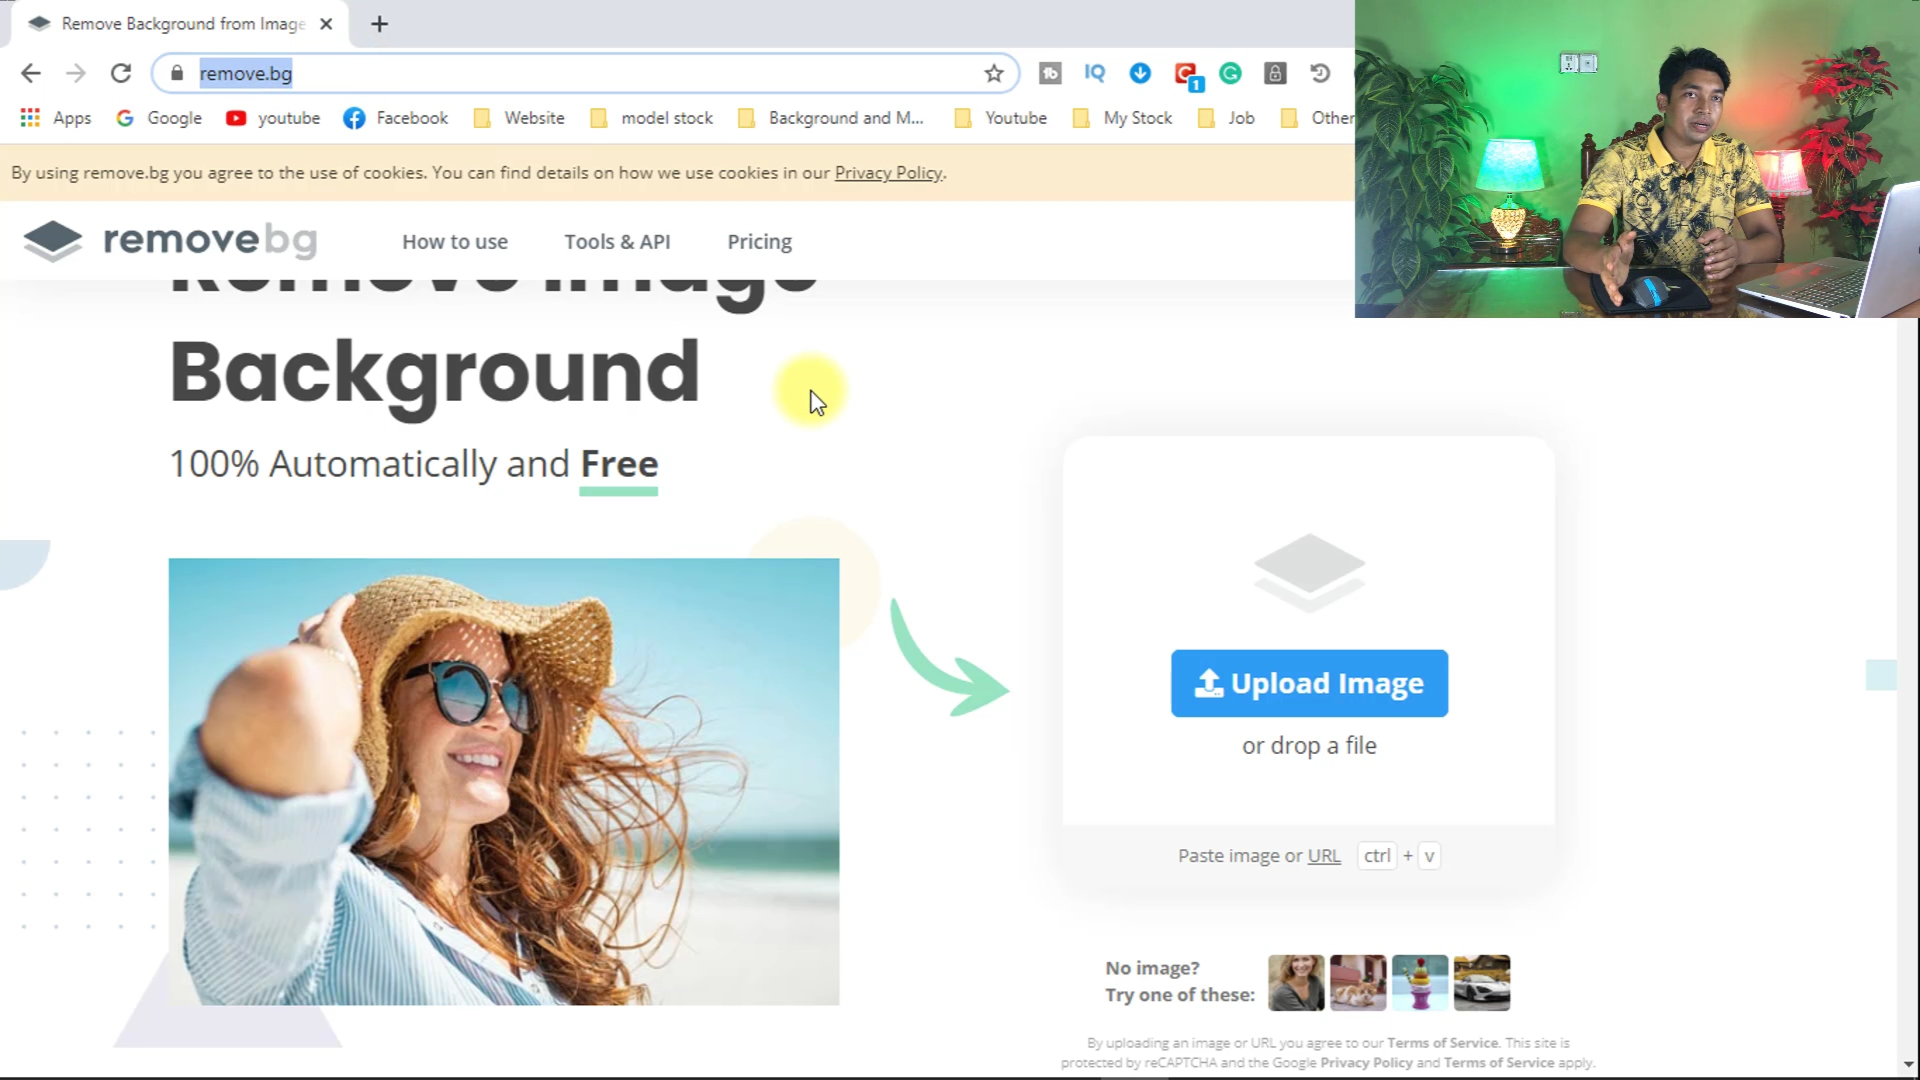 1-Click Automatic Background Remove Online and Auto Retouching Online Tips  and Tricks